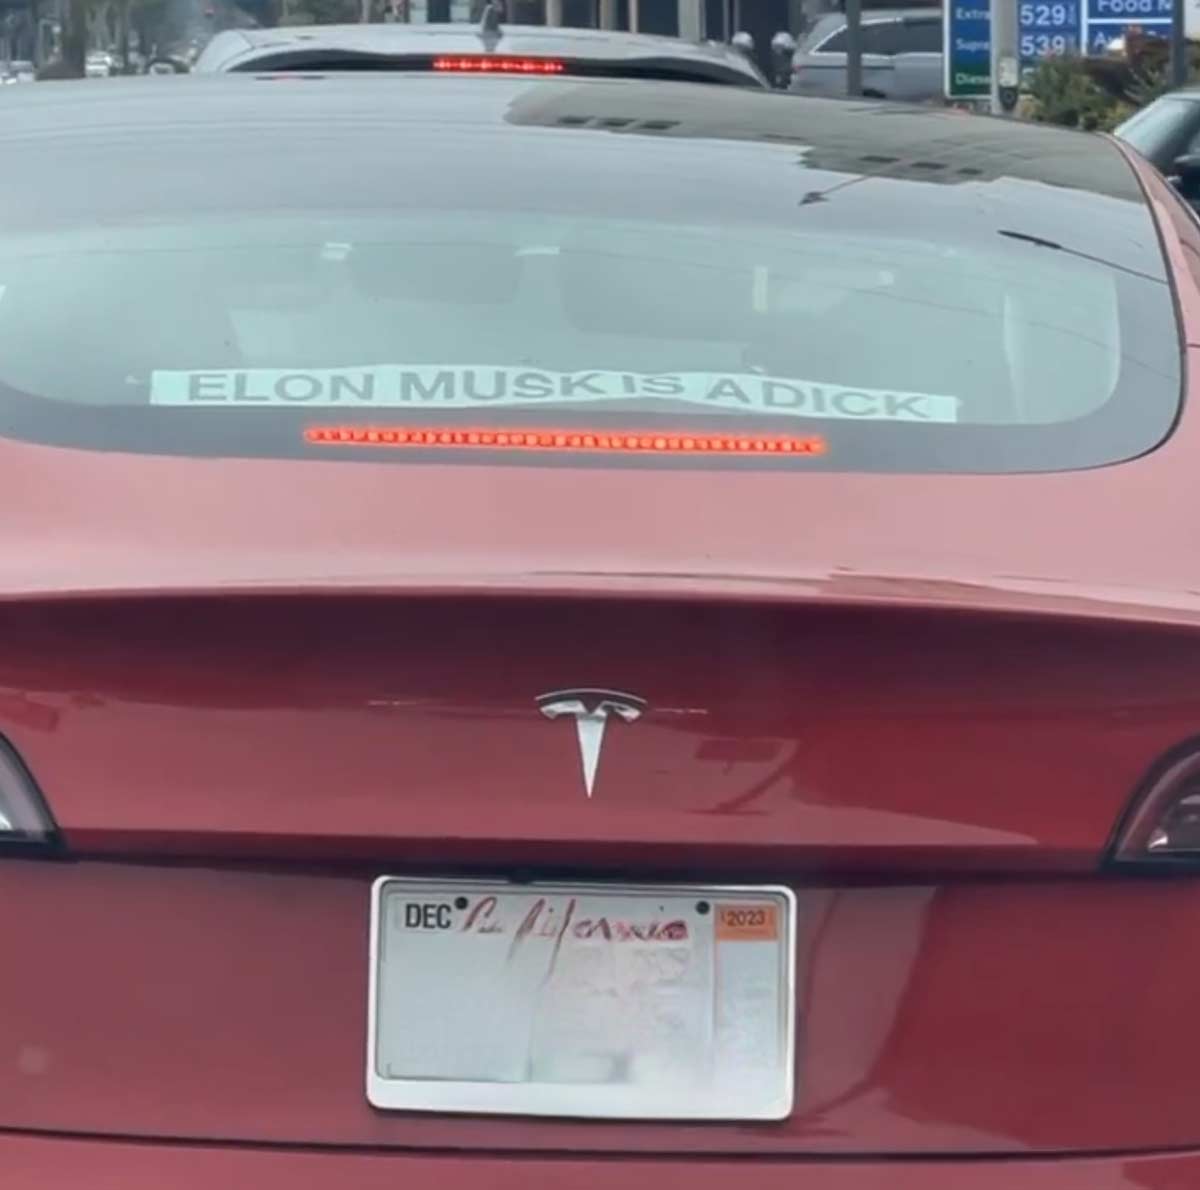 Guess someone isn't happy with their Tesla. Spotted in LA